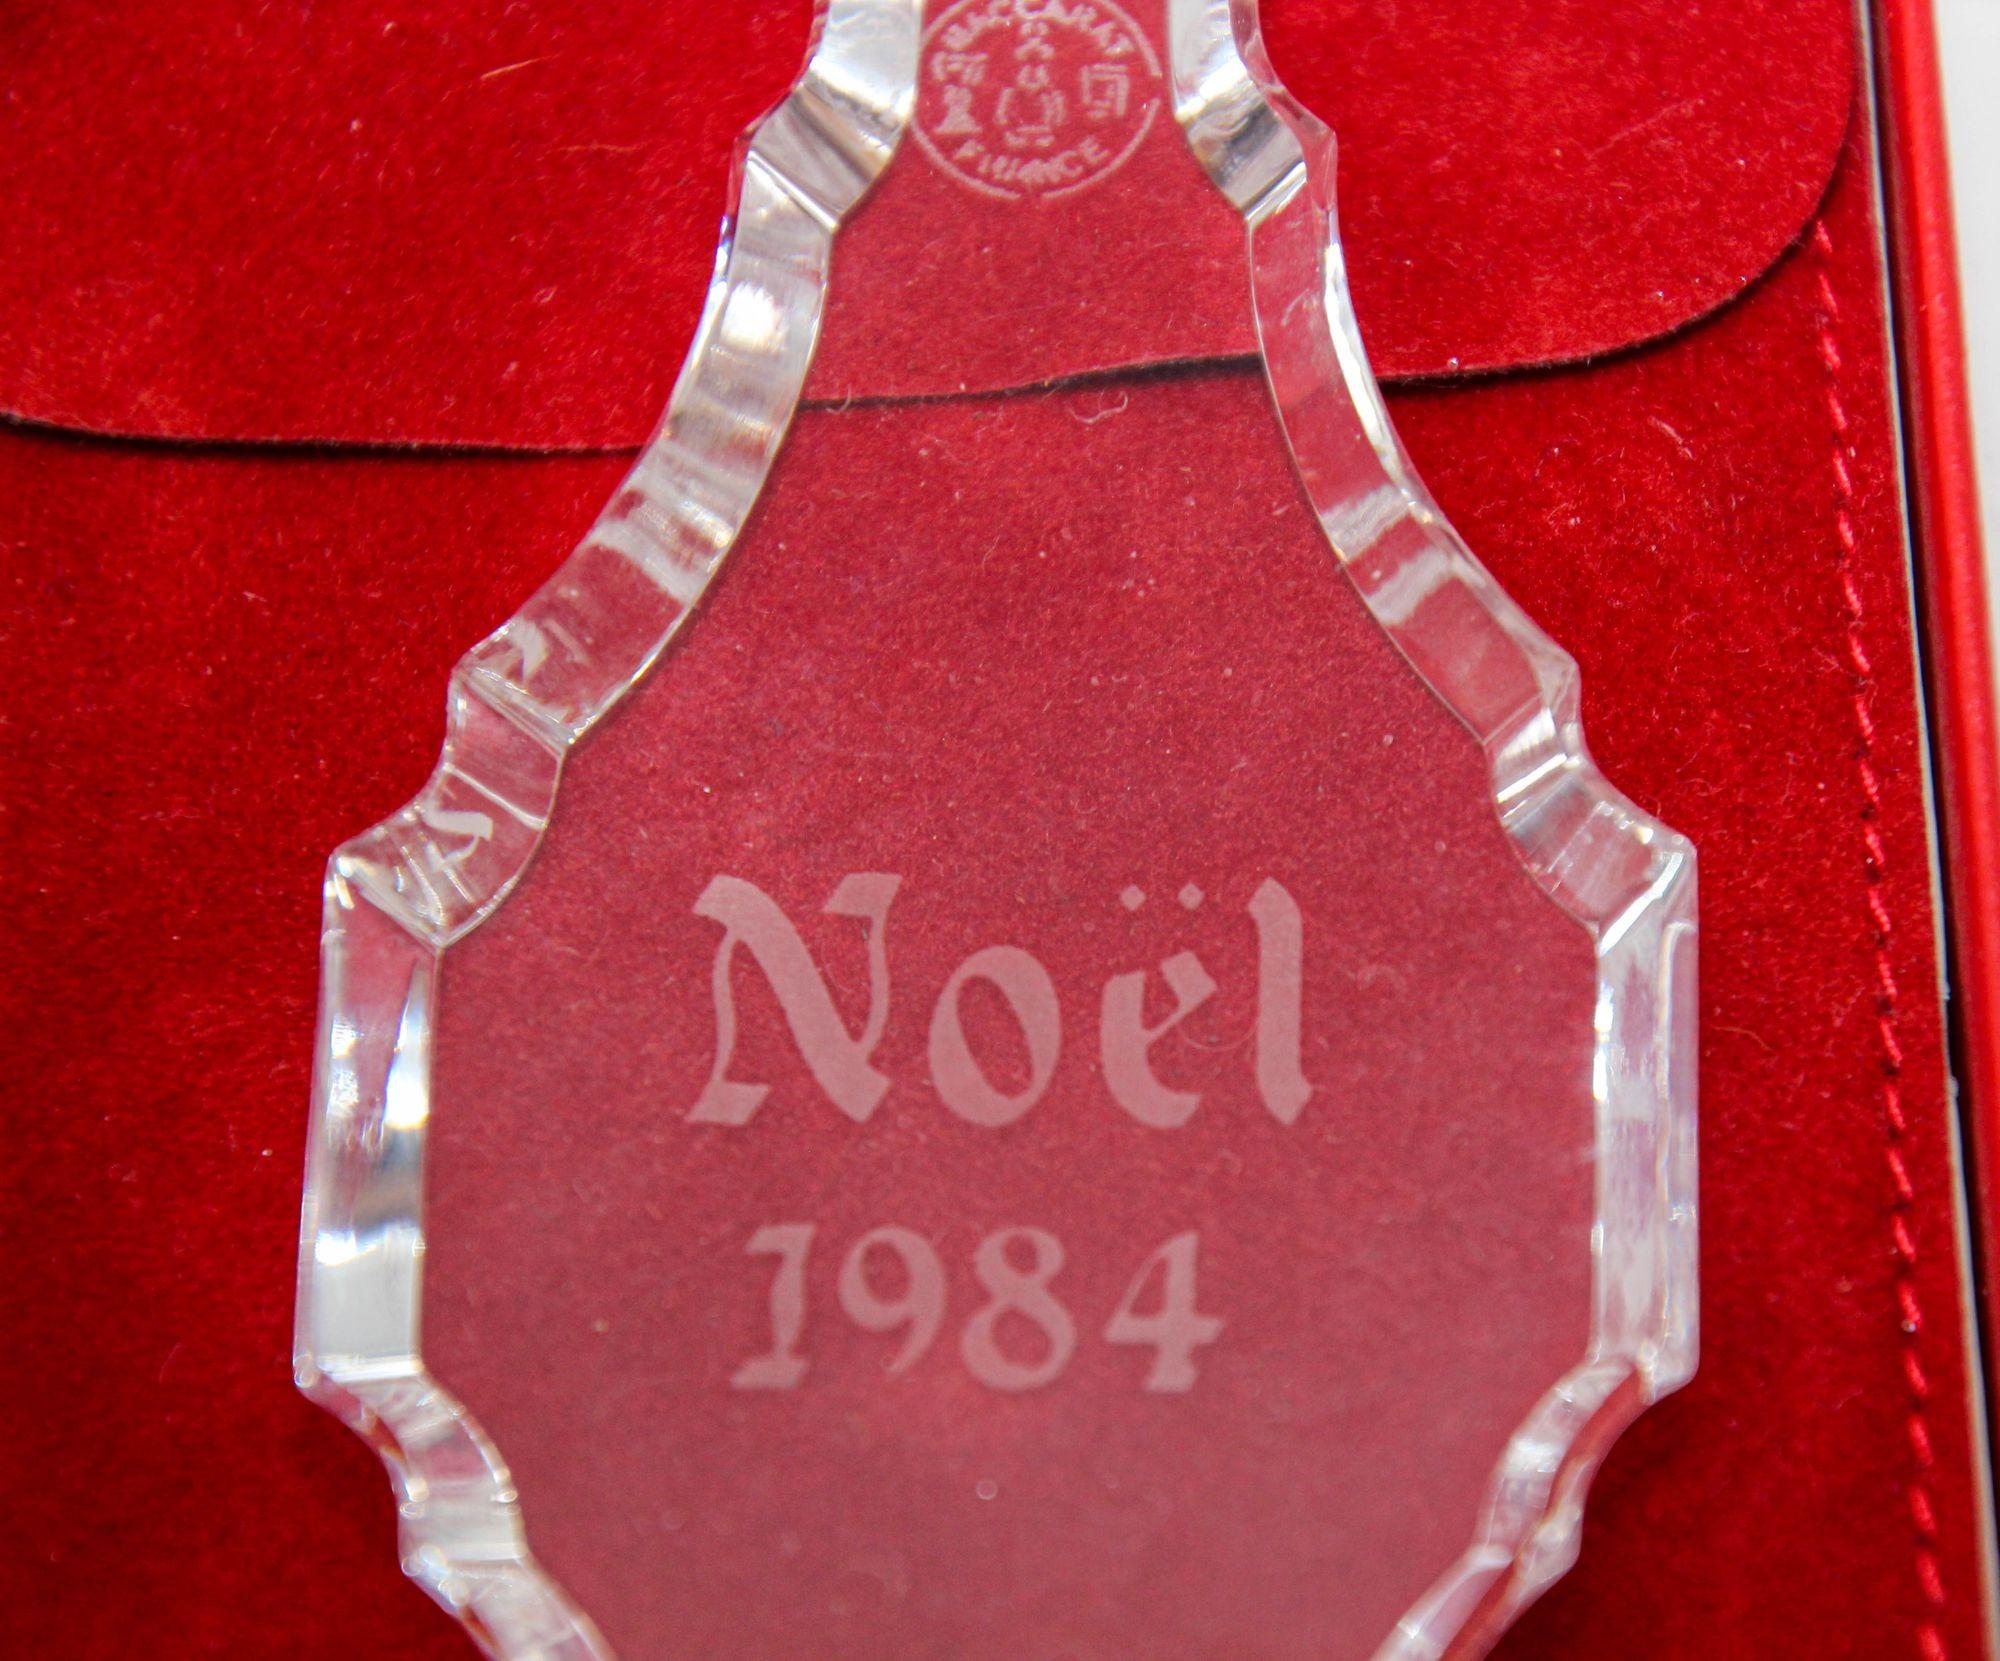 Collectible Vintage Baccarat Crystal Noel 1984 Ornament with Box In Good Condition For Sale In North Hollywood, CA